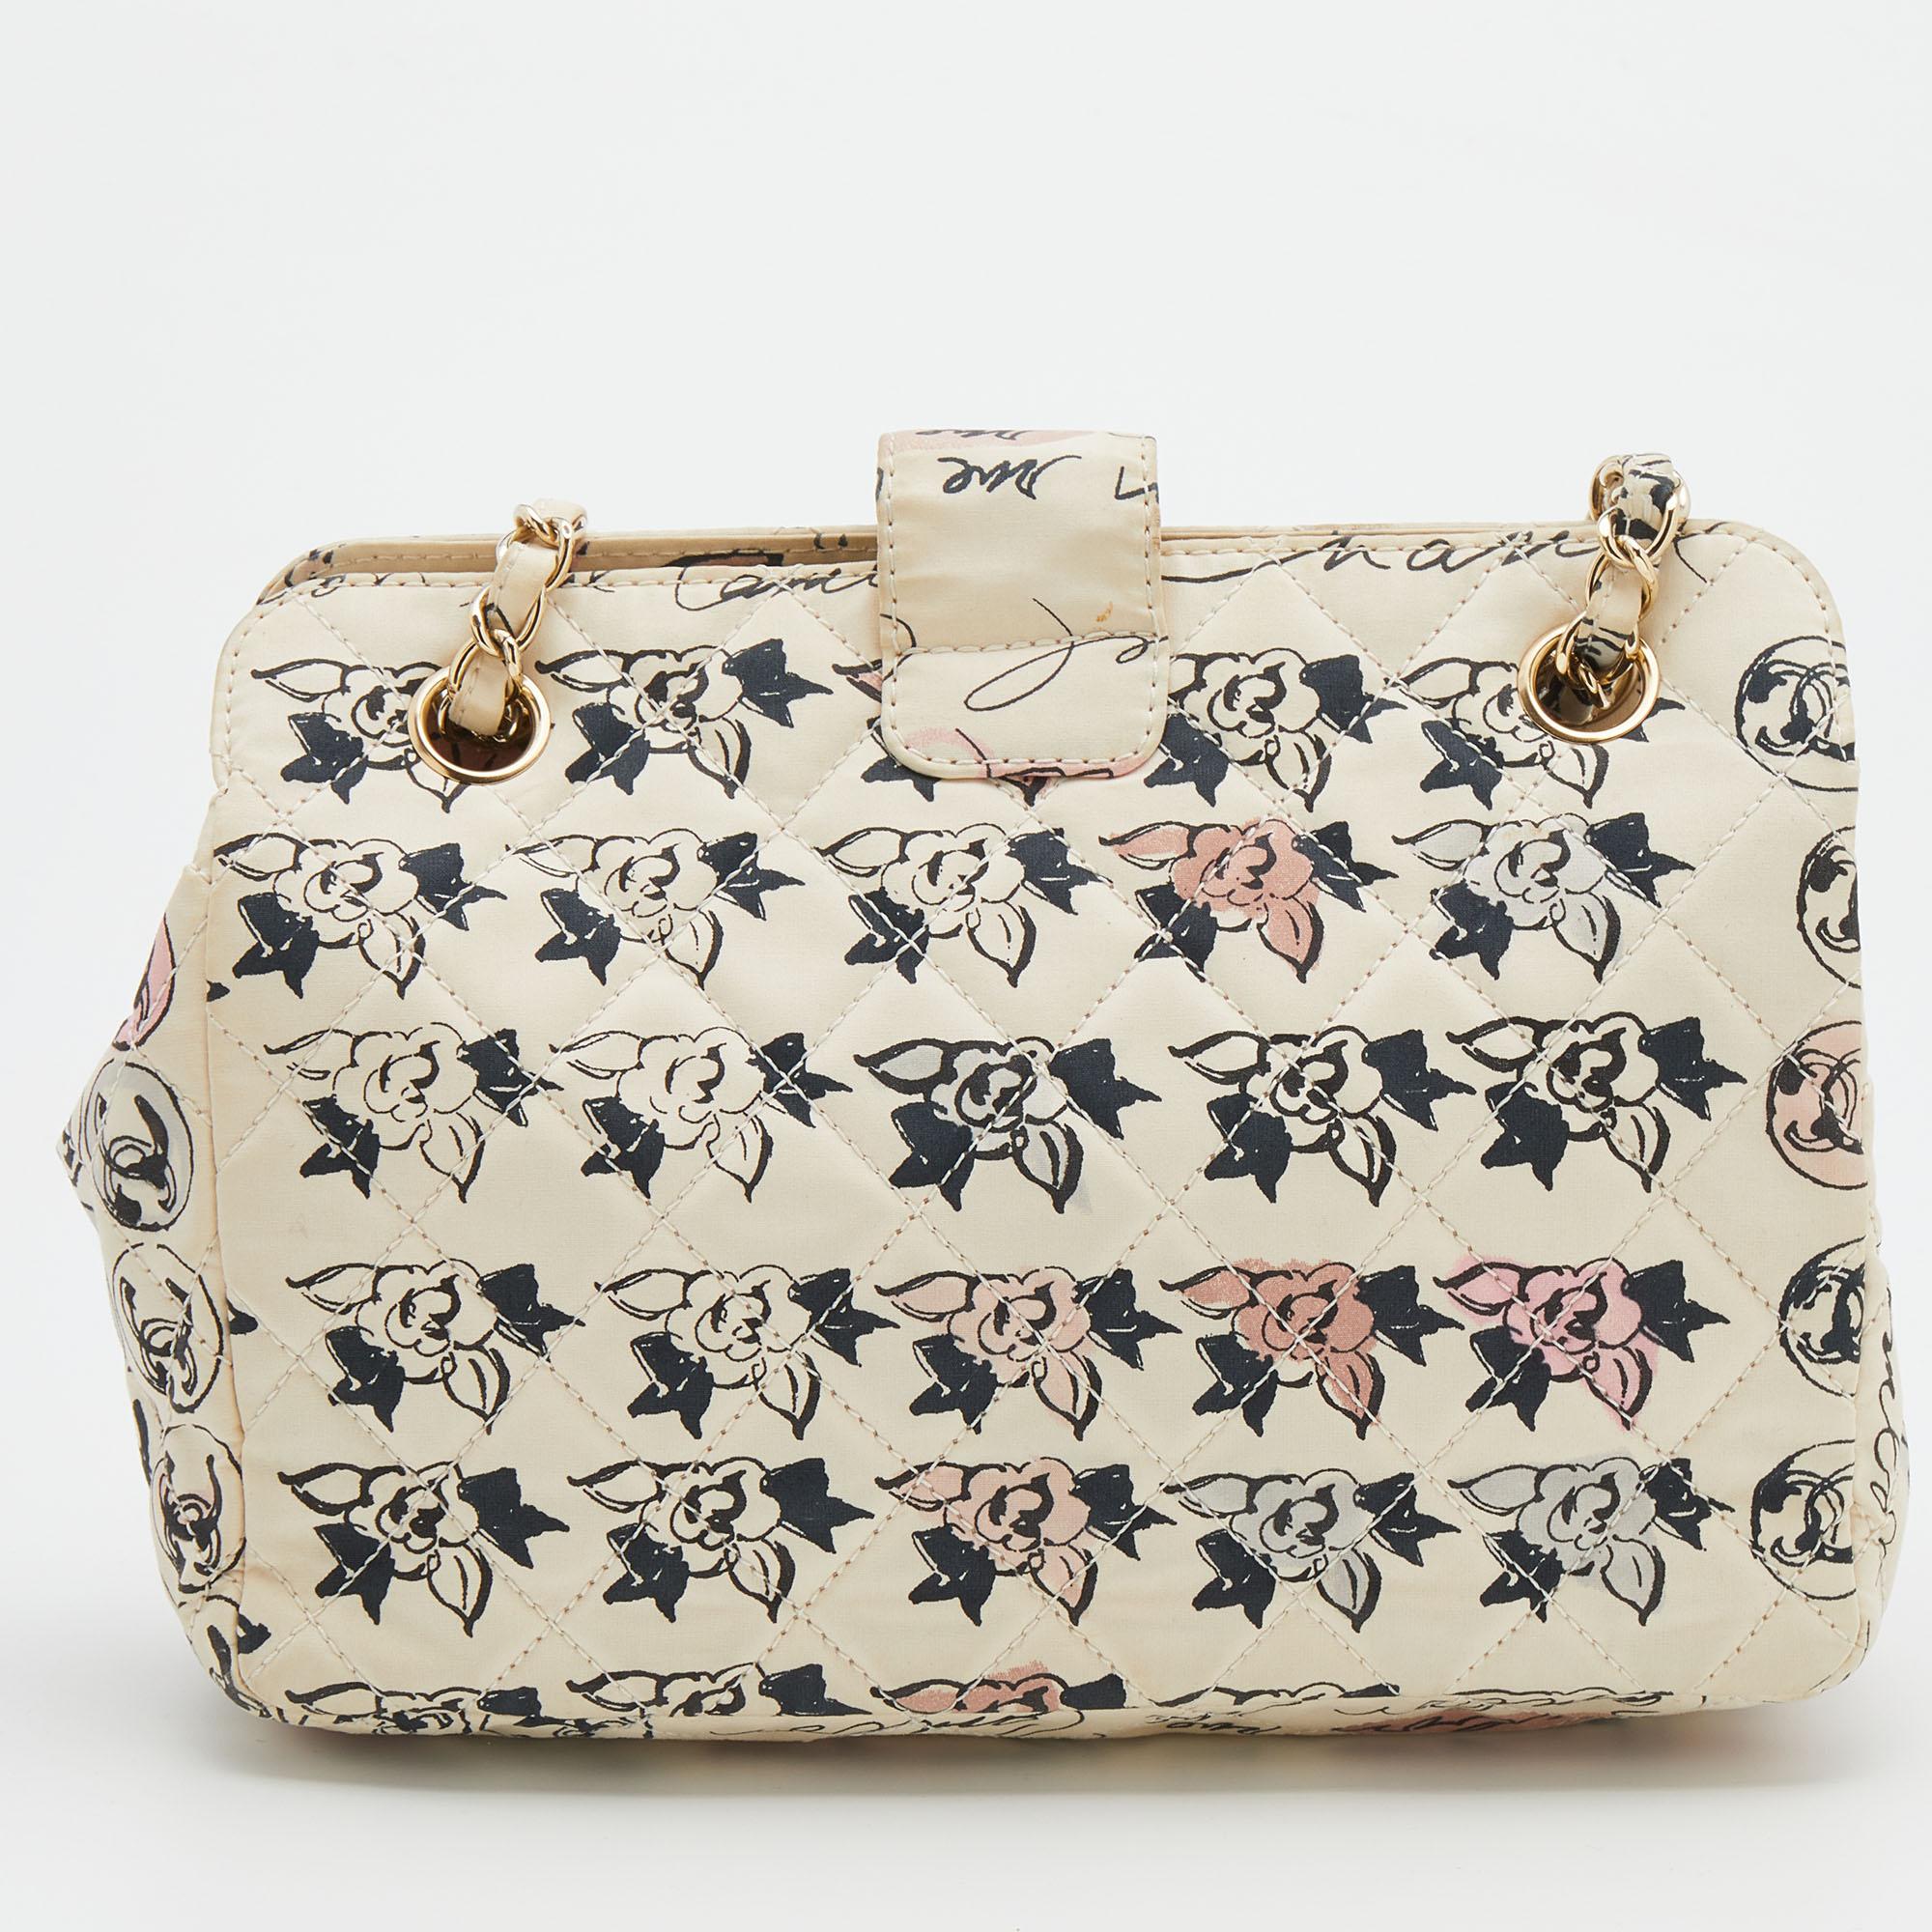 Designed to be functional and classic, this unique shoulder bag from Chanel is totally worth the buy. The cream-hued bag is crafted from signature graffiti-printed, quilted fabric and is designed with the CC turn-lock, gold-tone hardware, and a